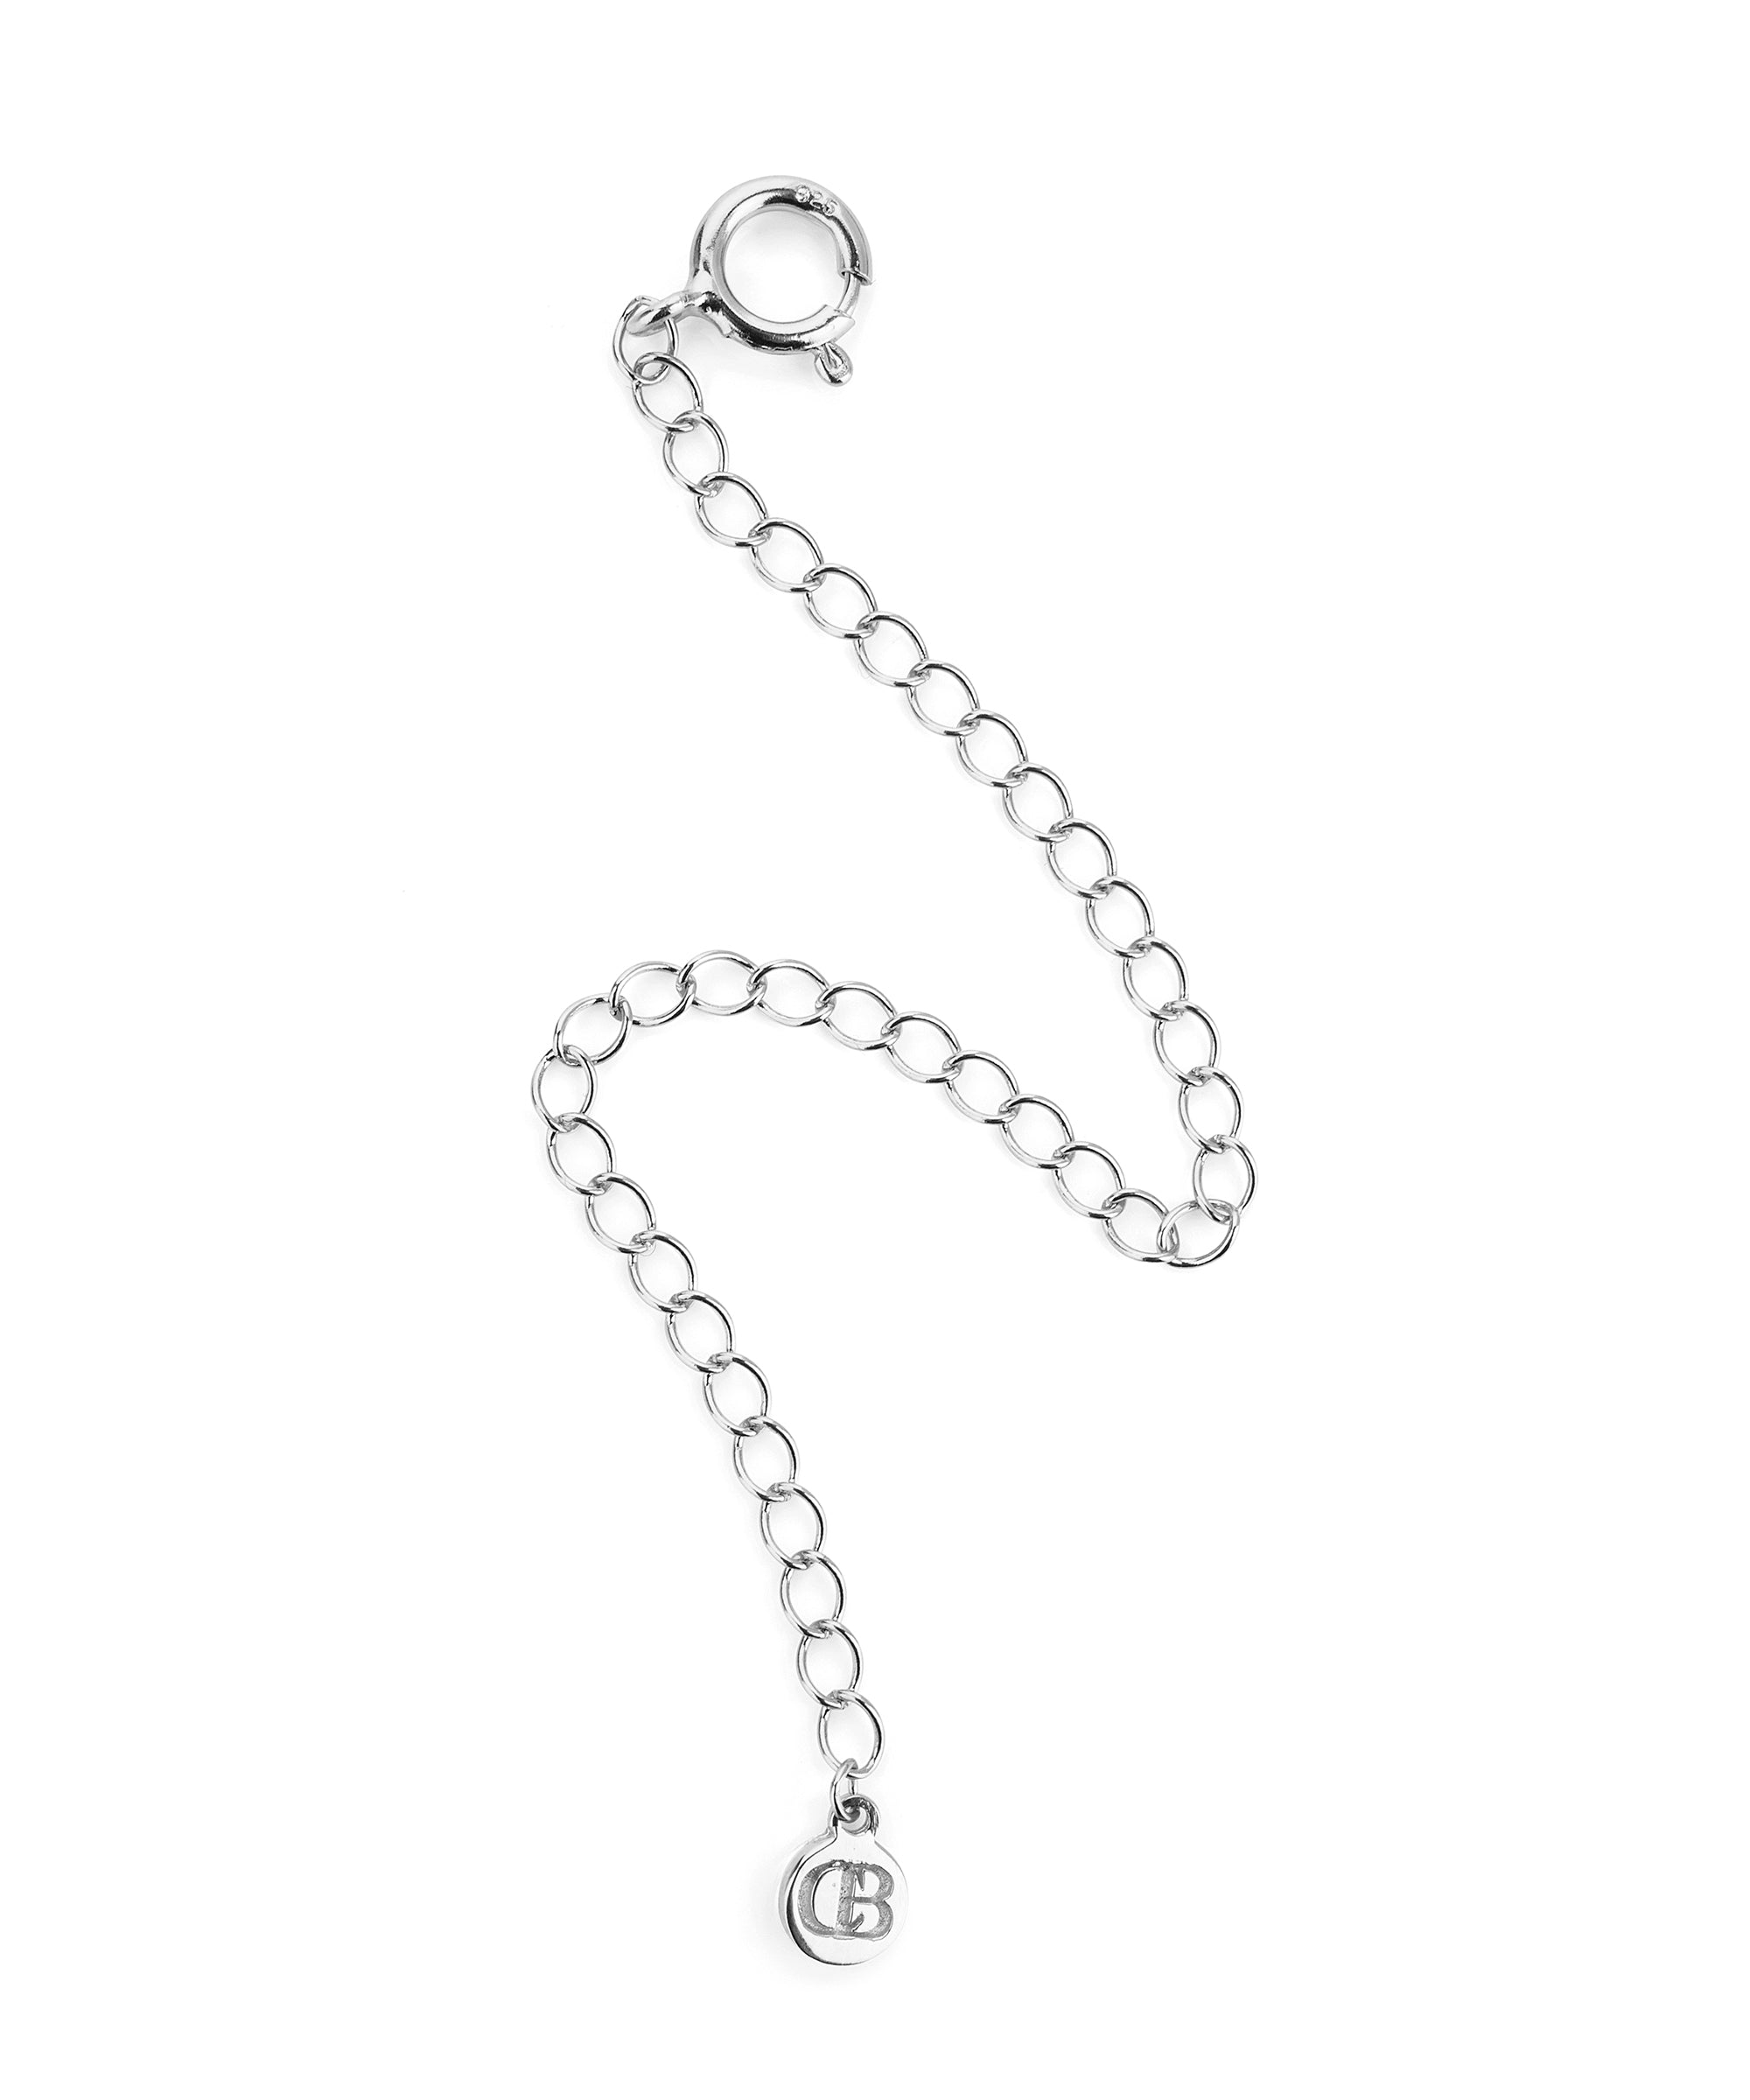 Sterling silver necklace extender chain